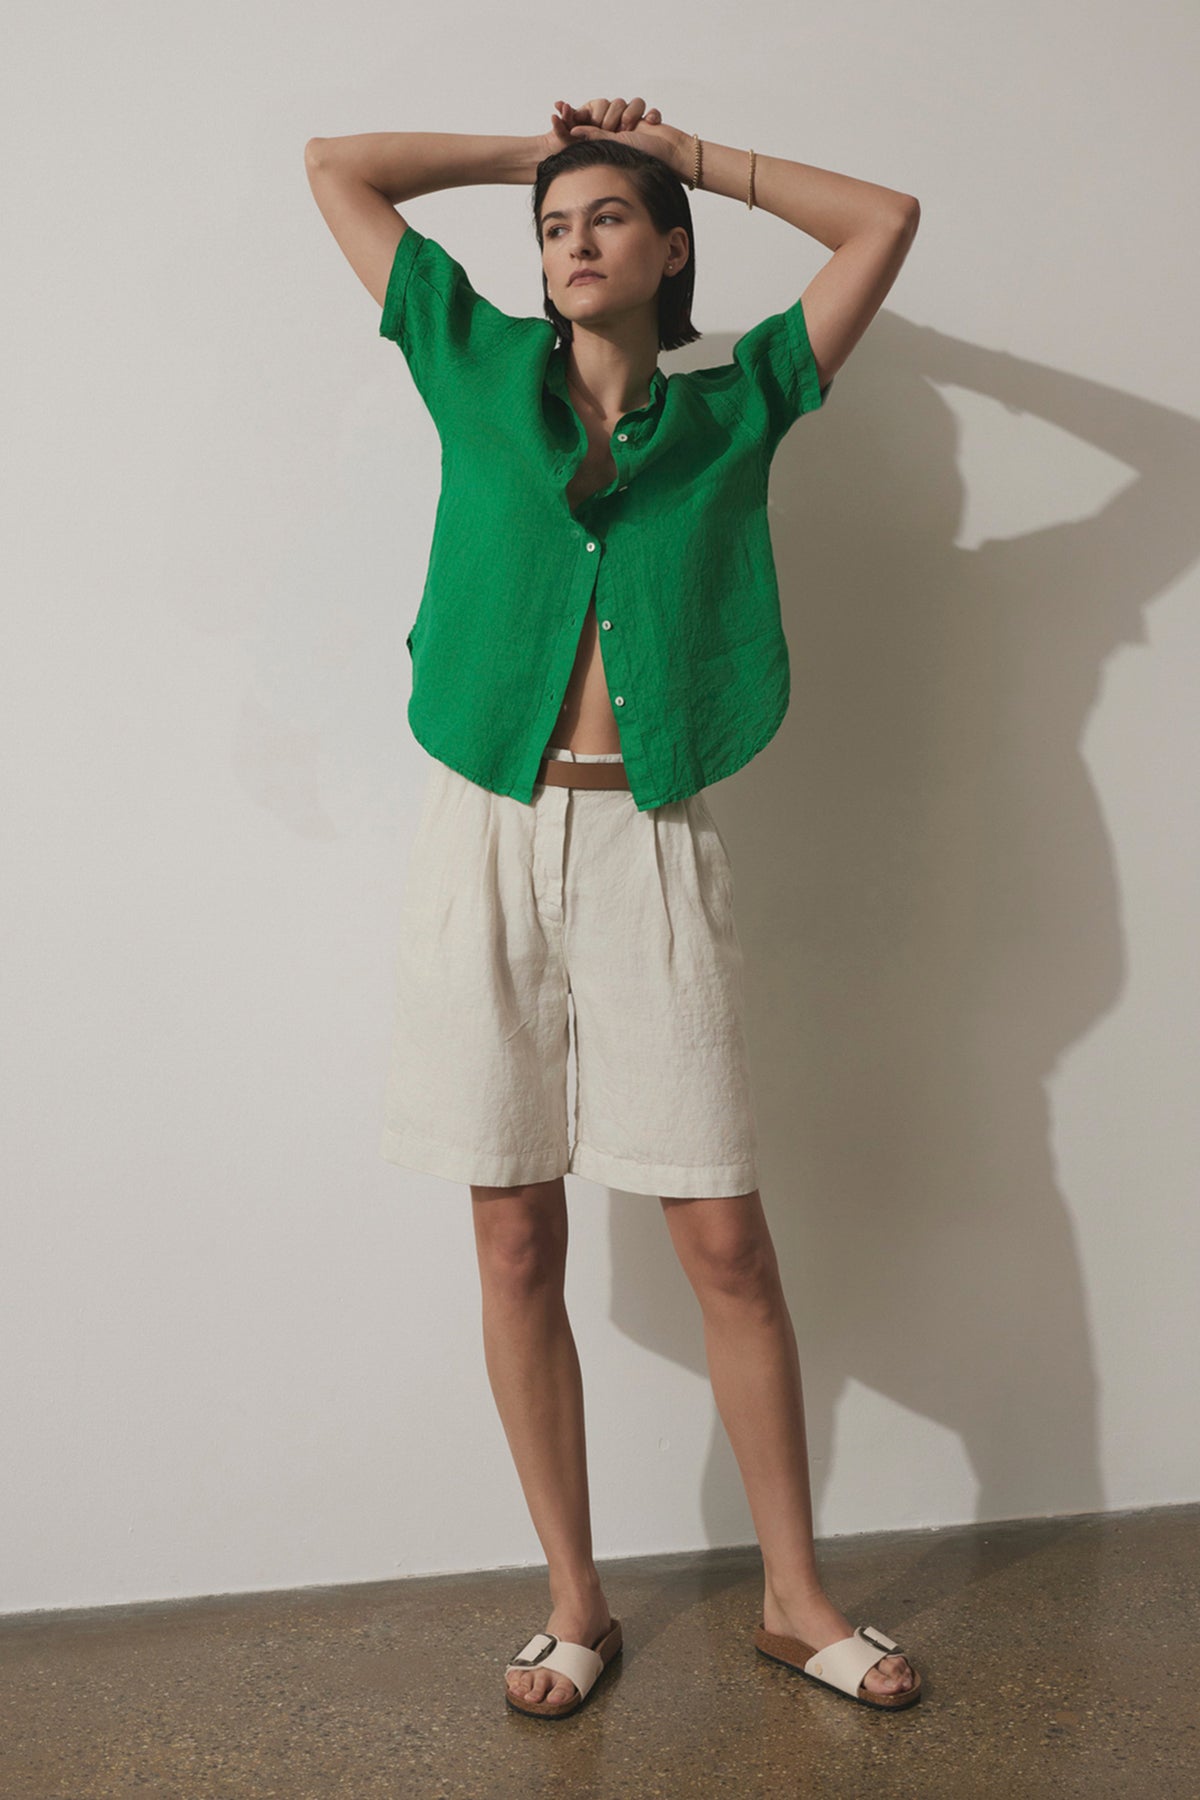   Woman in a green CLAREMONT LINEN SHIRT by Velvet by Jenny Graham and beige shorts posing with hands behind head against a light background. 